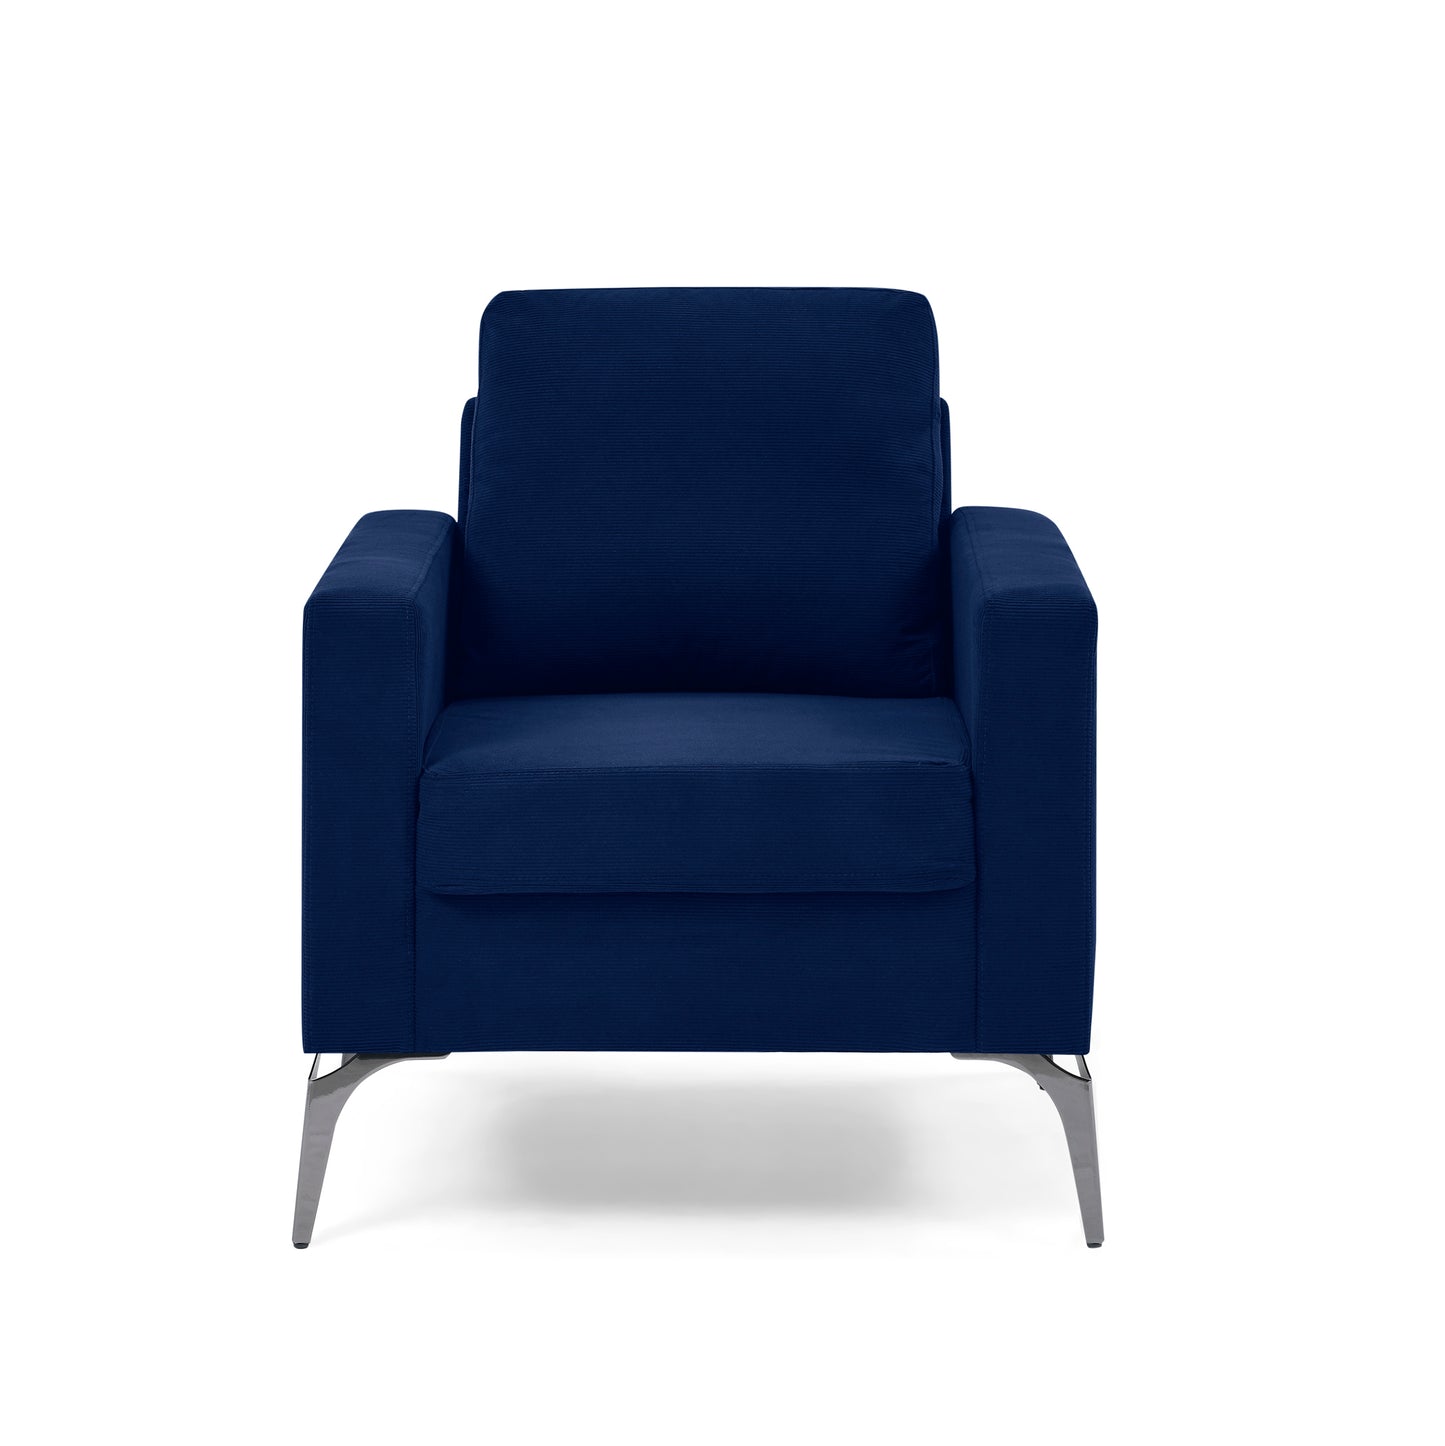 Sofa Chair,with Square Arms and Tight Back ,Corduroy Navy